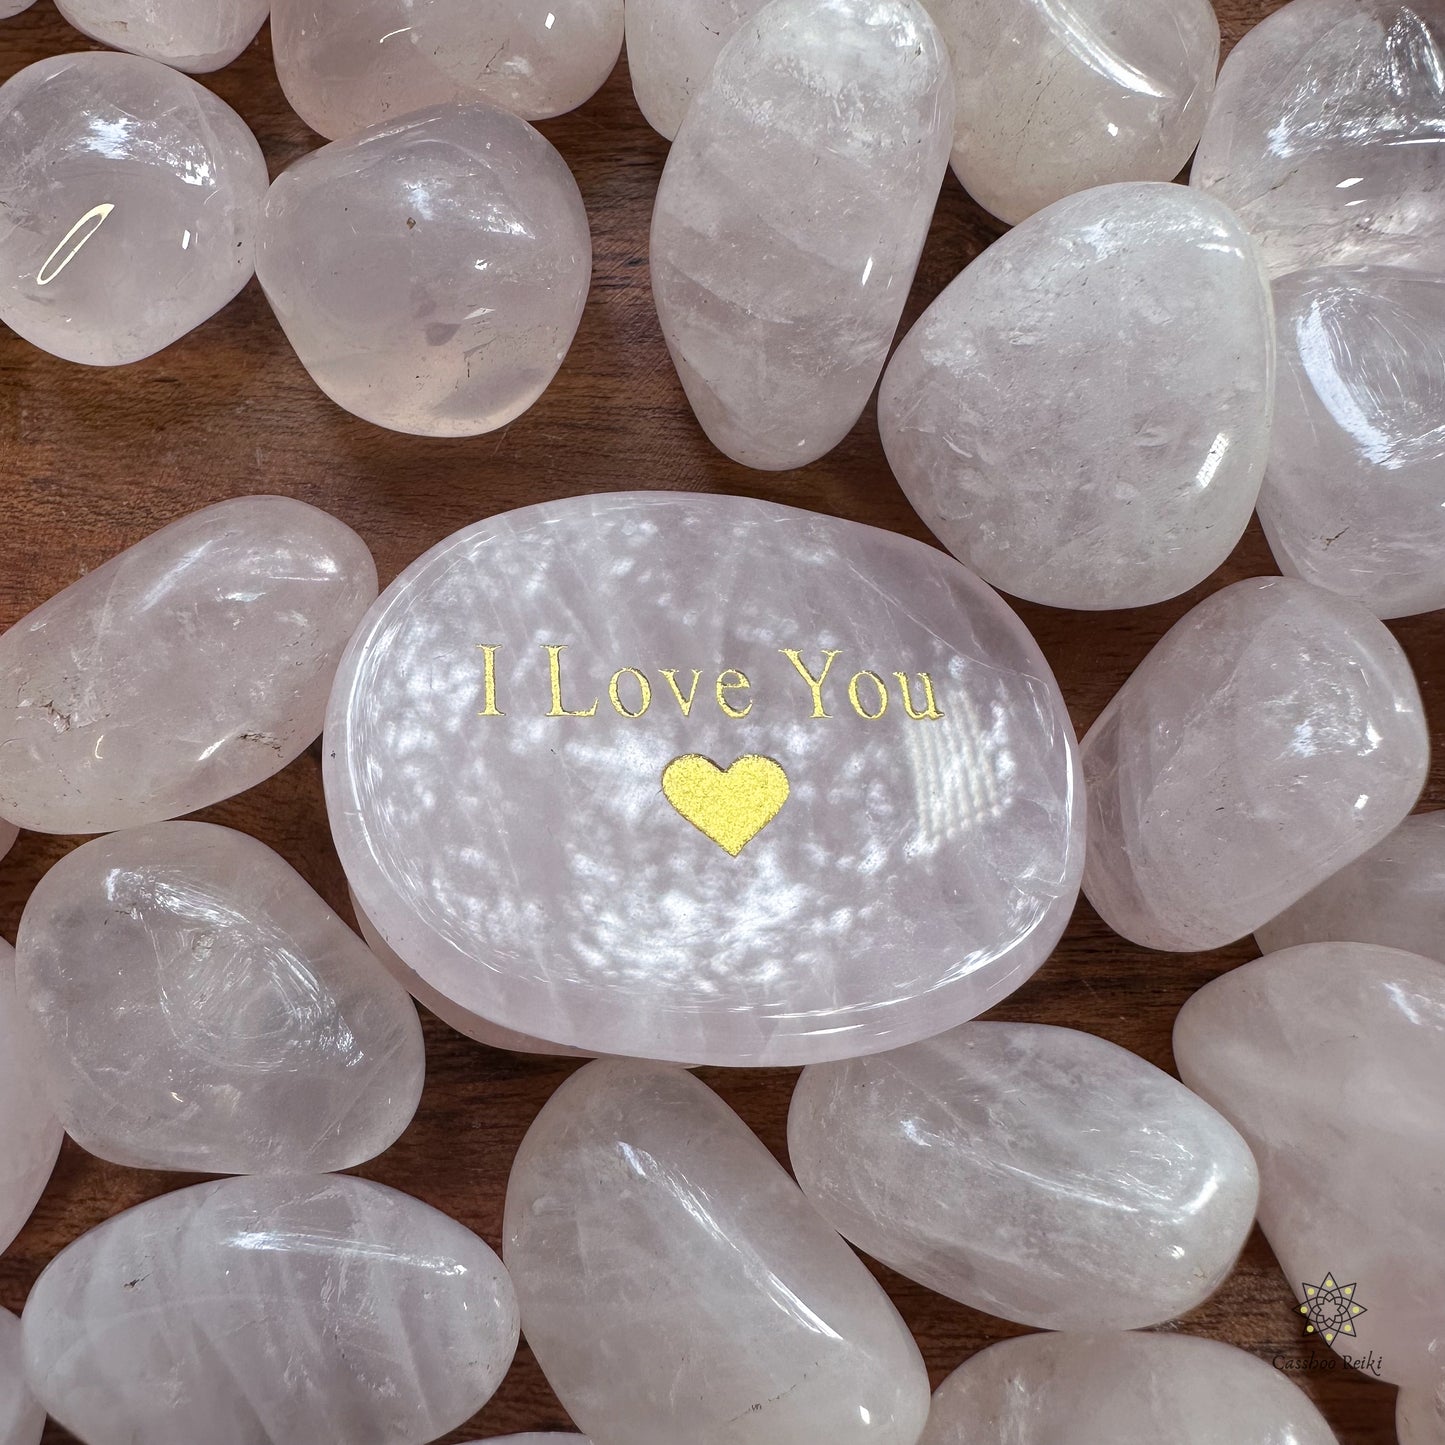 I Love You Palm Stone in Pink Quartz. Stone for Unconditional Love. Gifts for mom